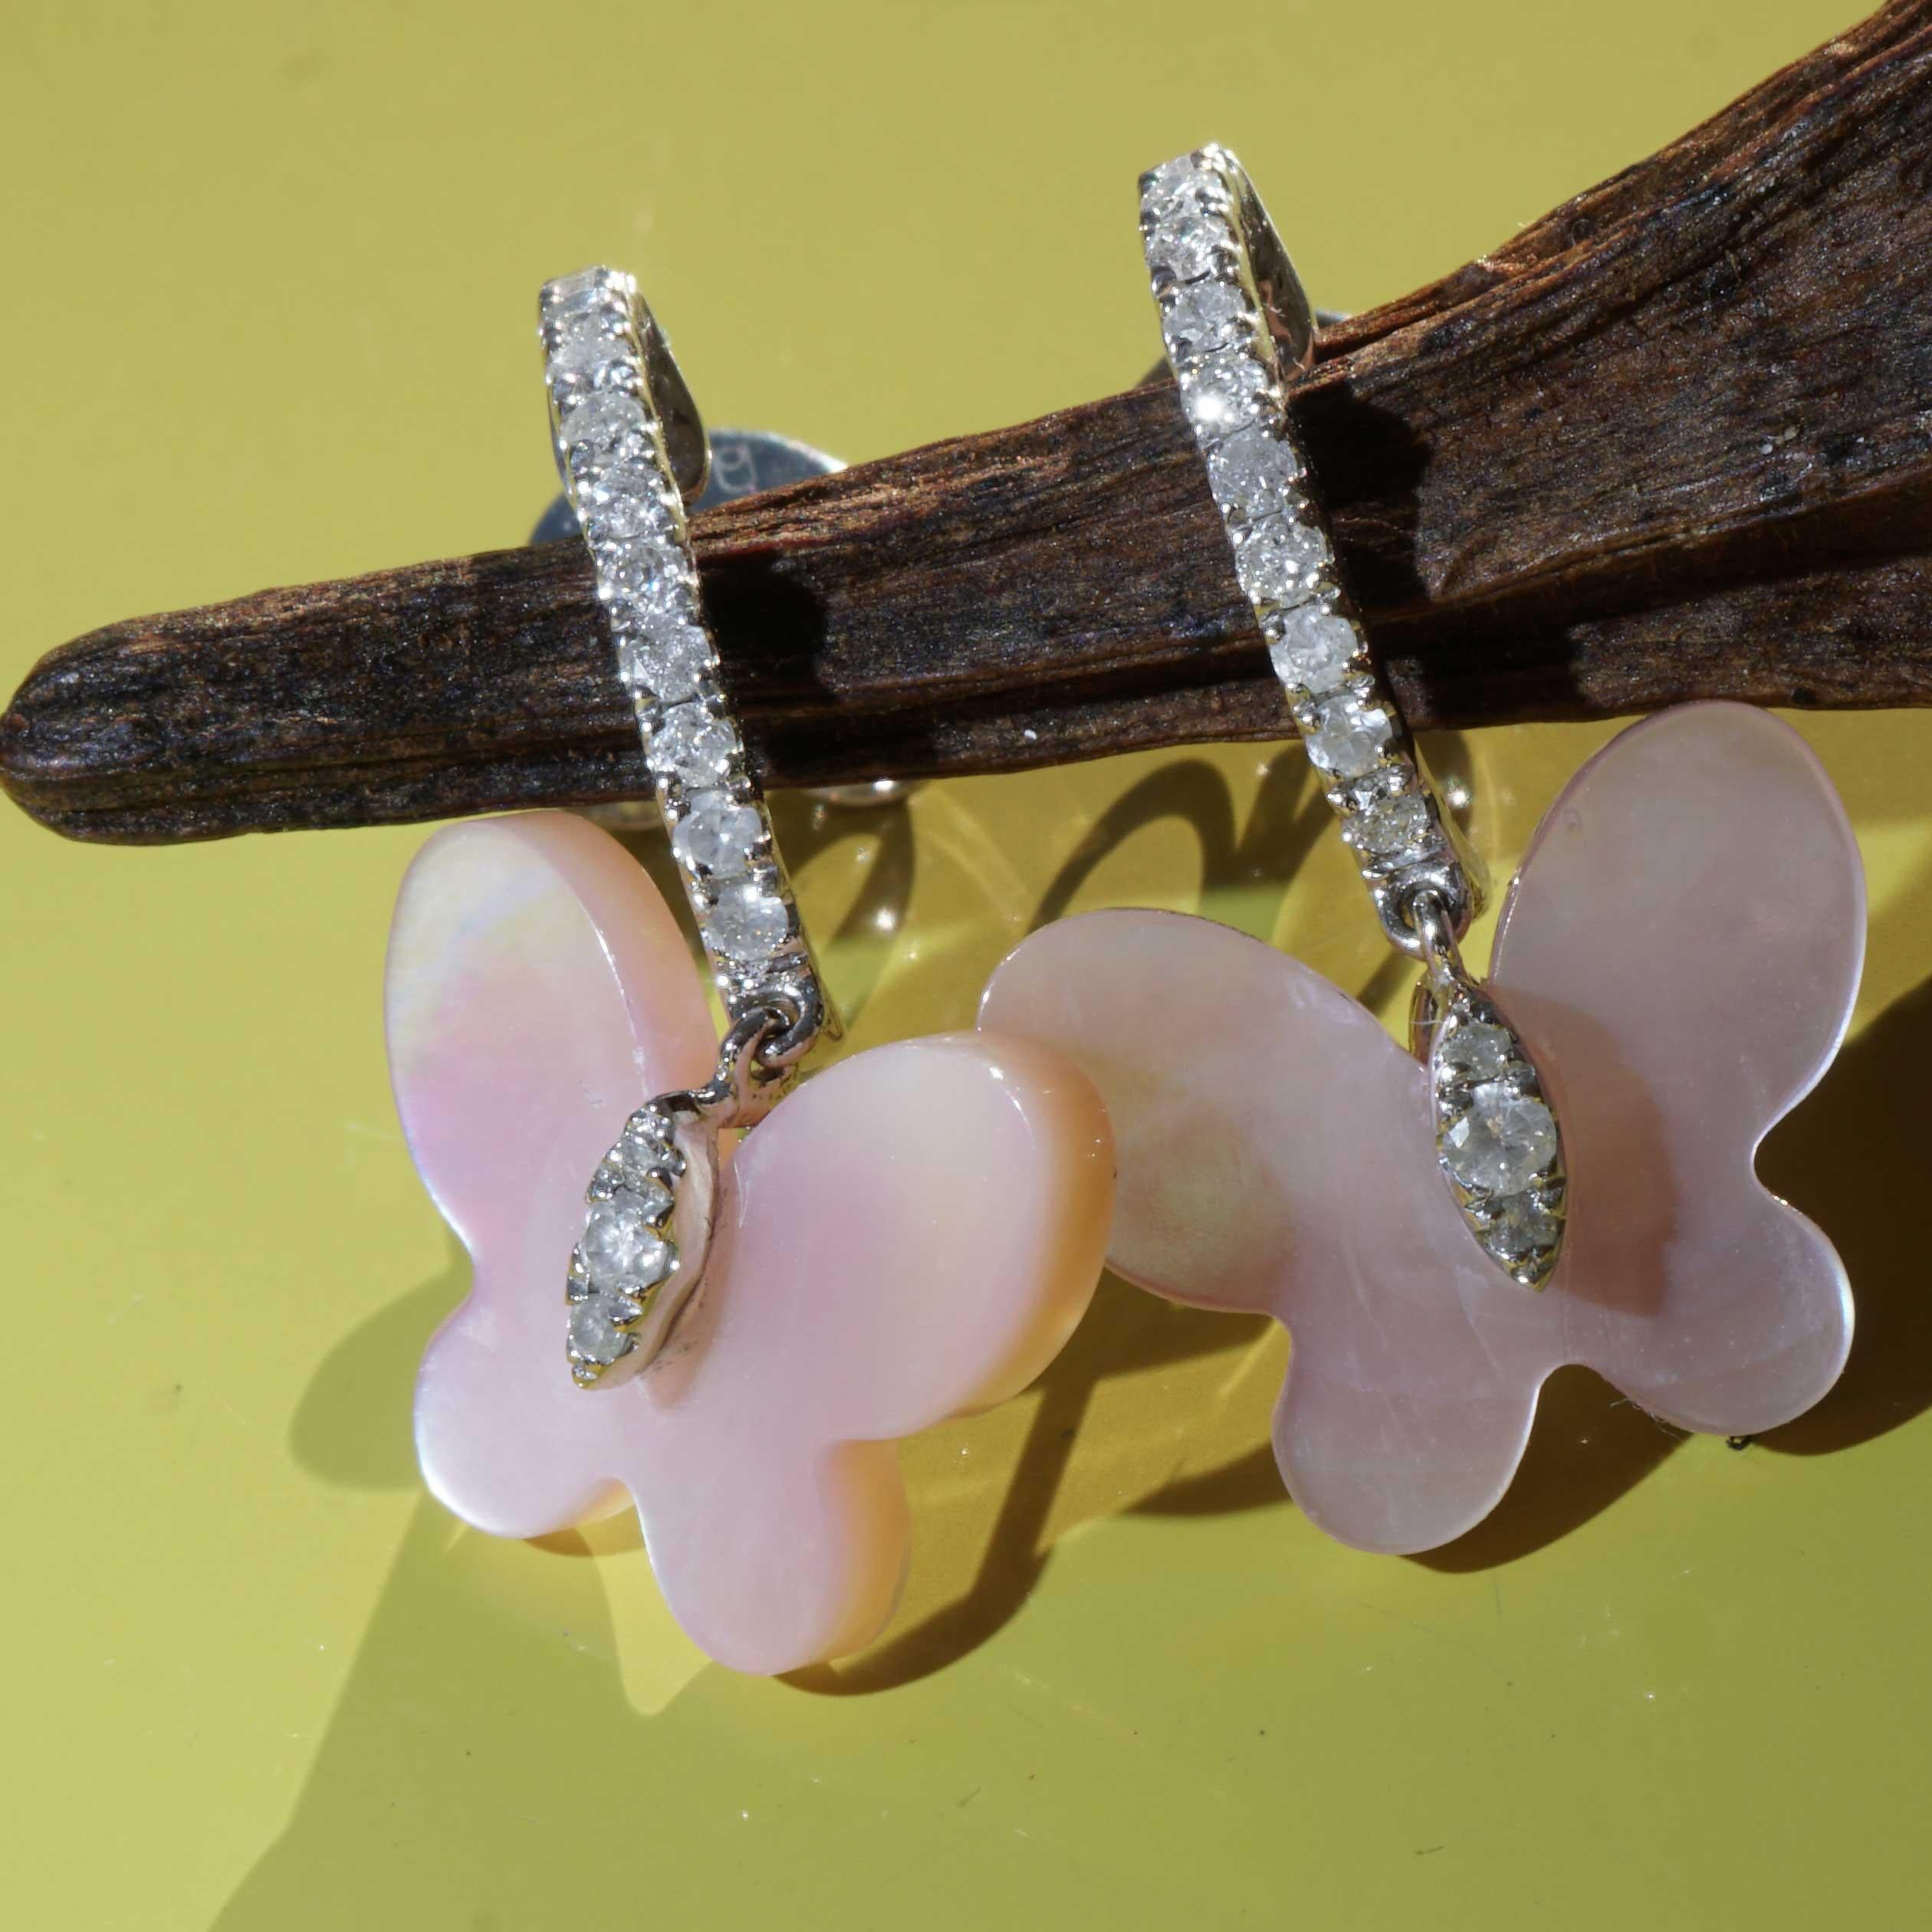 Brilliant Cut Mother of Pearl Butterfly Brilliant Earrings 0.24 ct   Lightheartedness and Joy For Sale